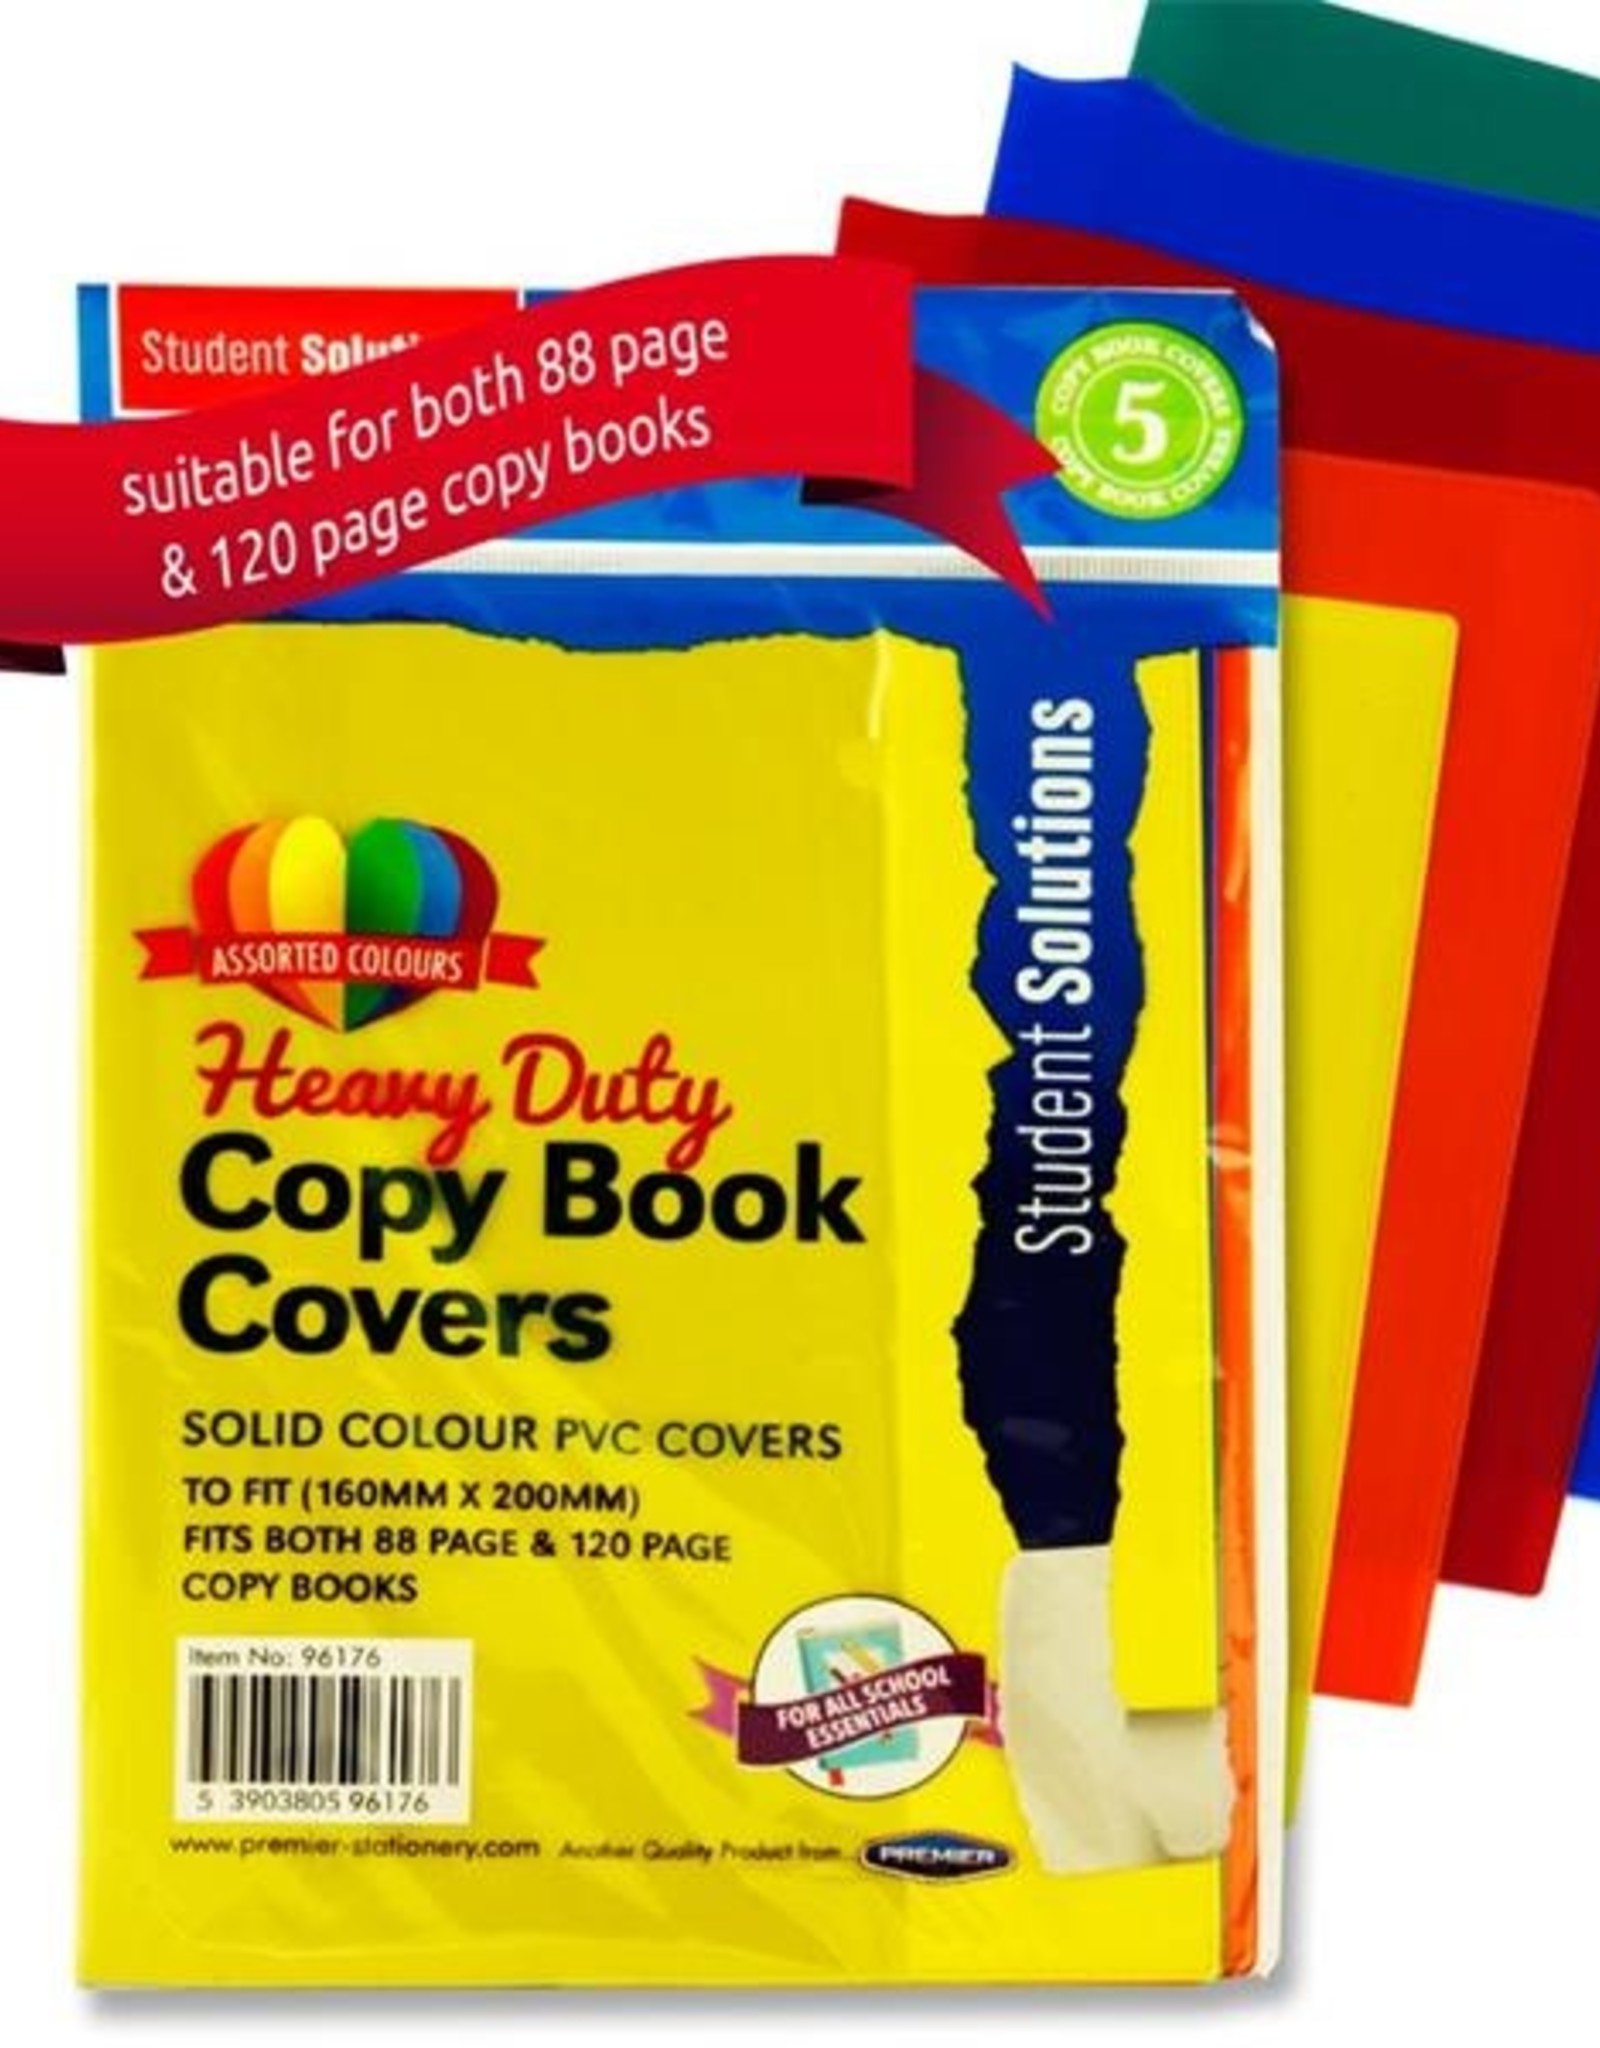 PACK OF 5 HEAVY DUTY BOOK COVERS